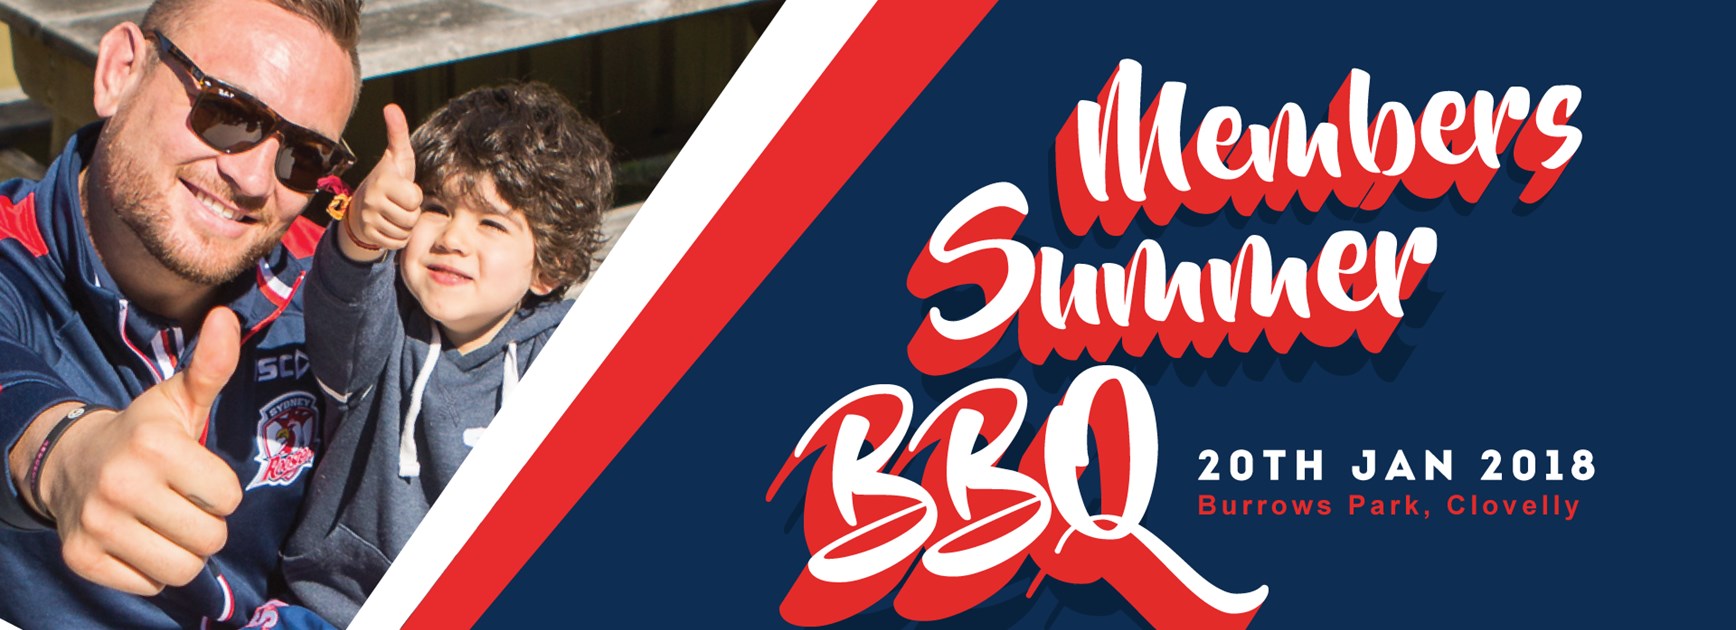 Members Only BBQ This Saturday!